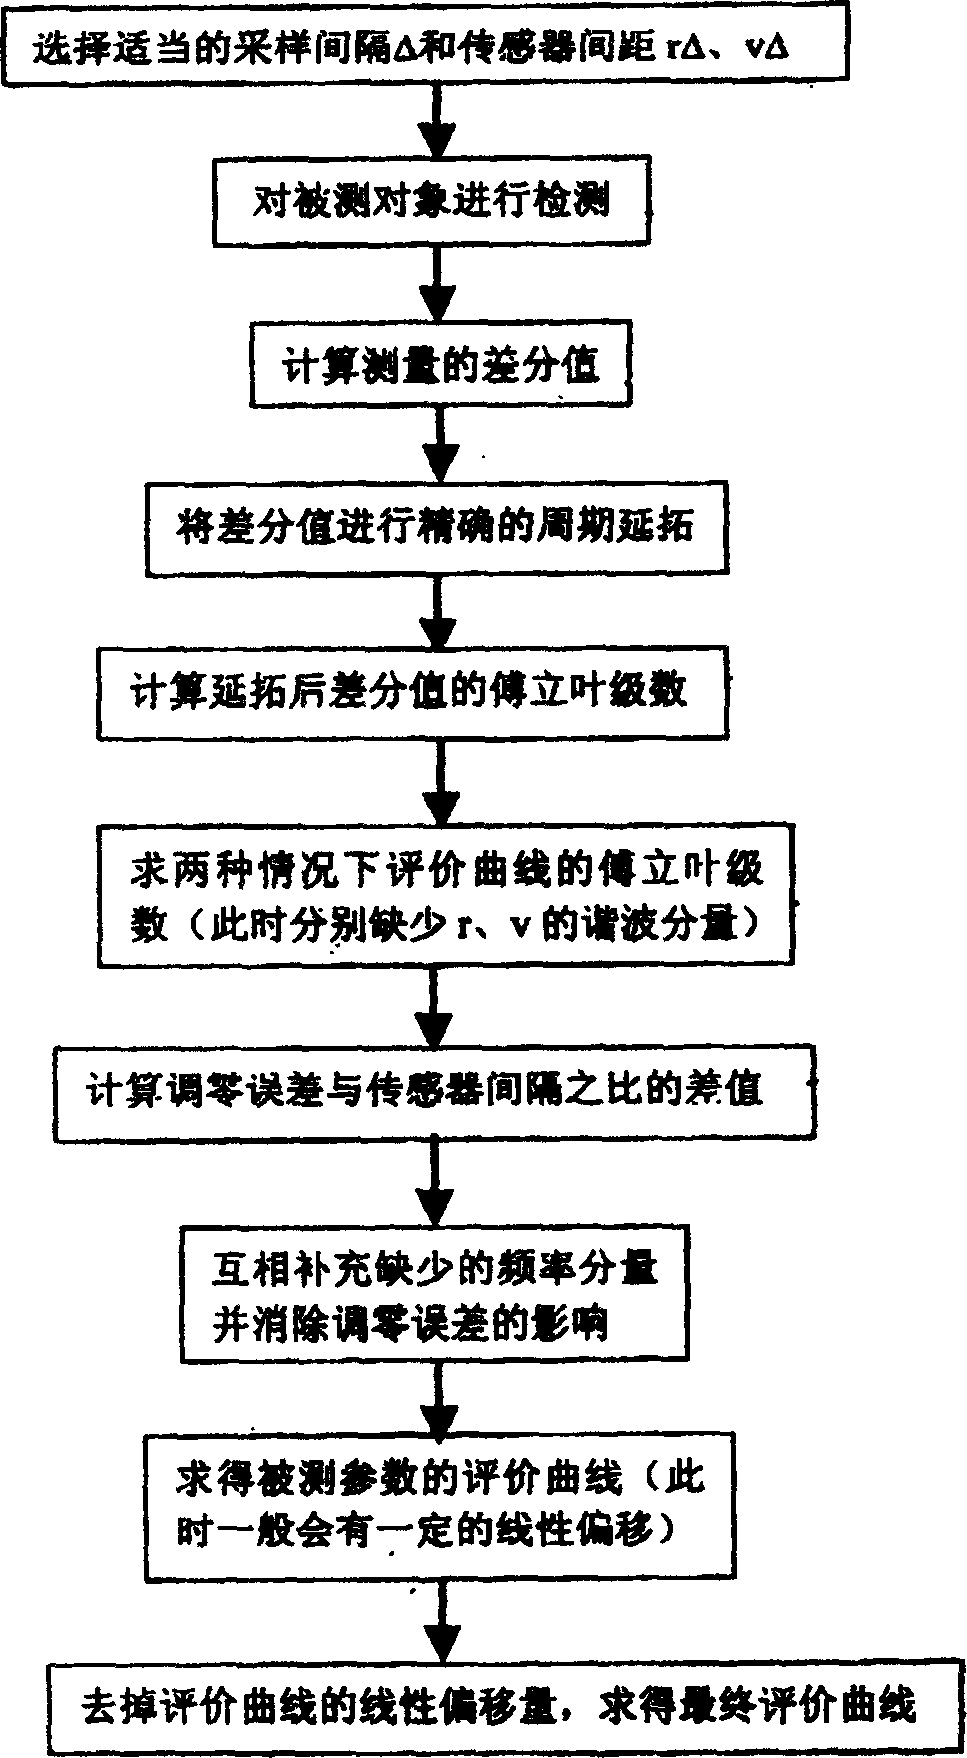 Method for utilizing frequency domain method to make defference measurement of accurate reconfiguration